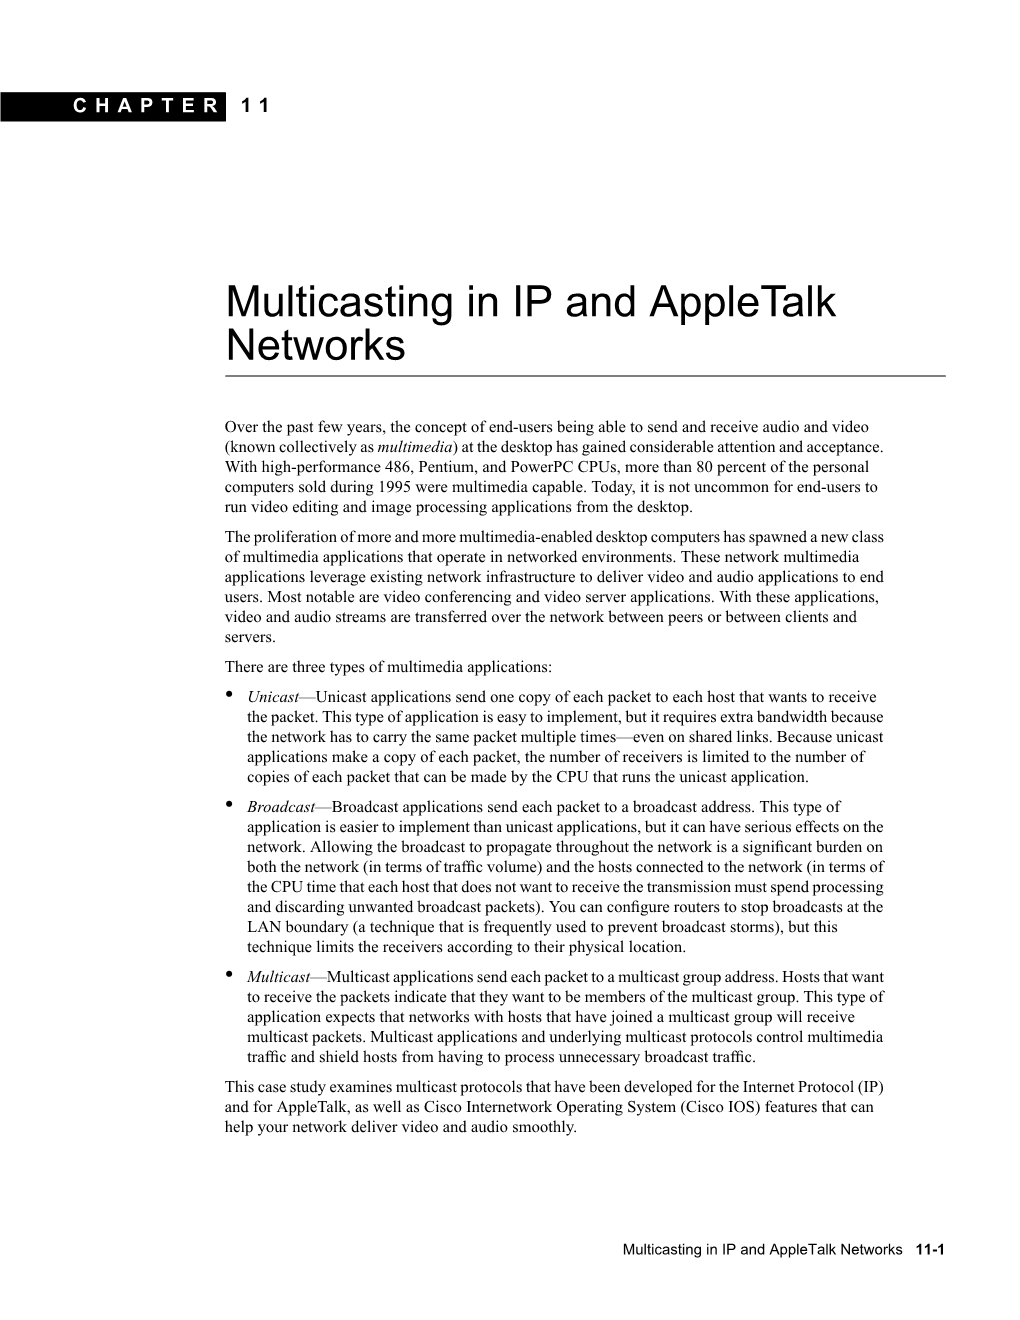 Multicasting in IP and Appletalk Networks